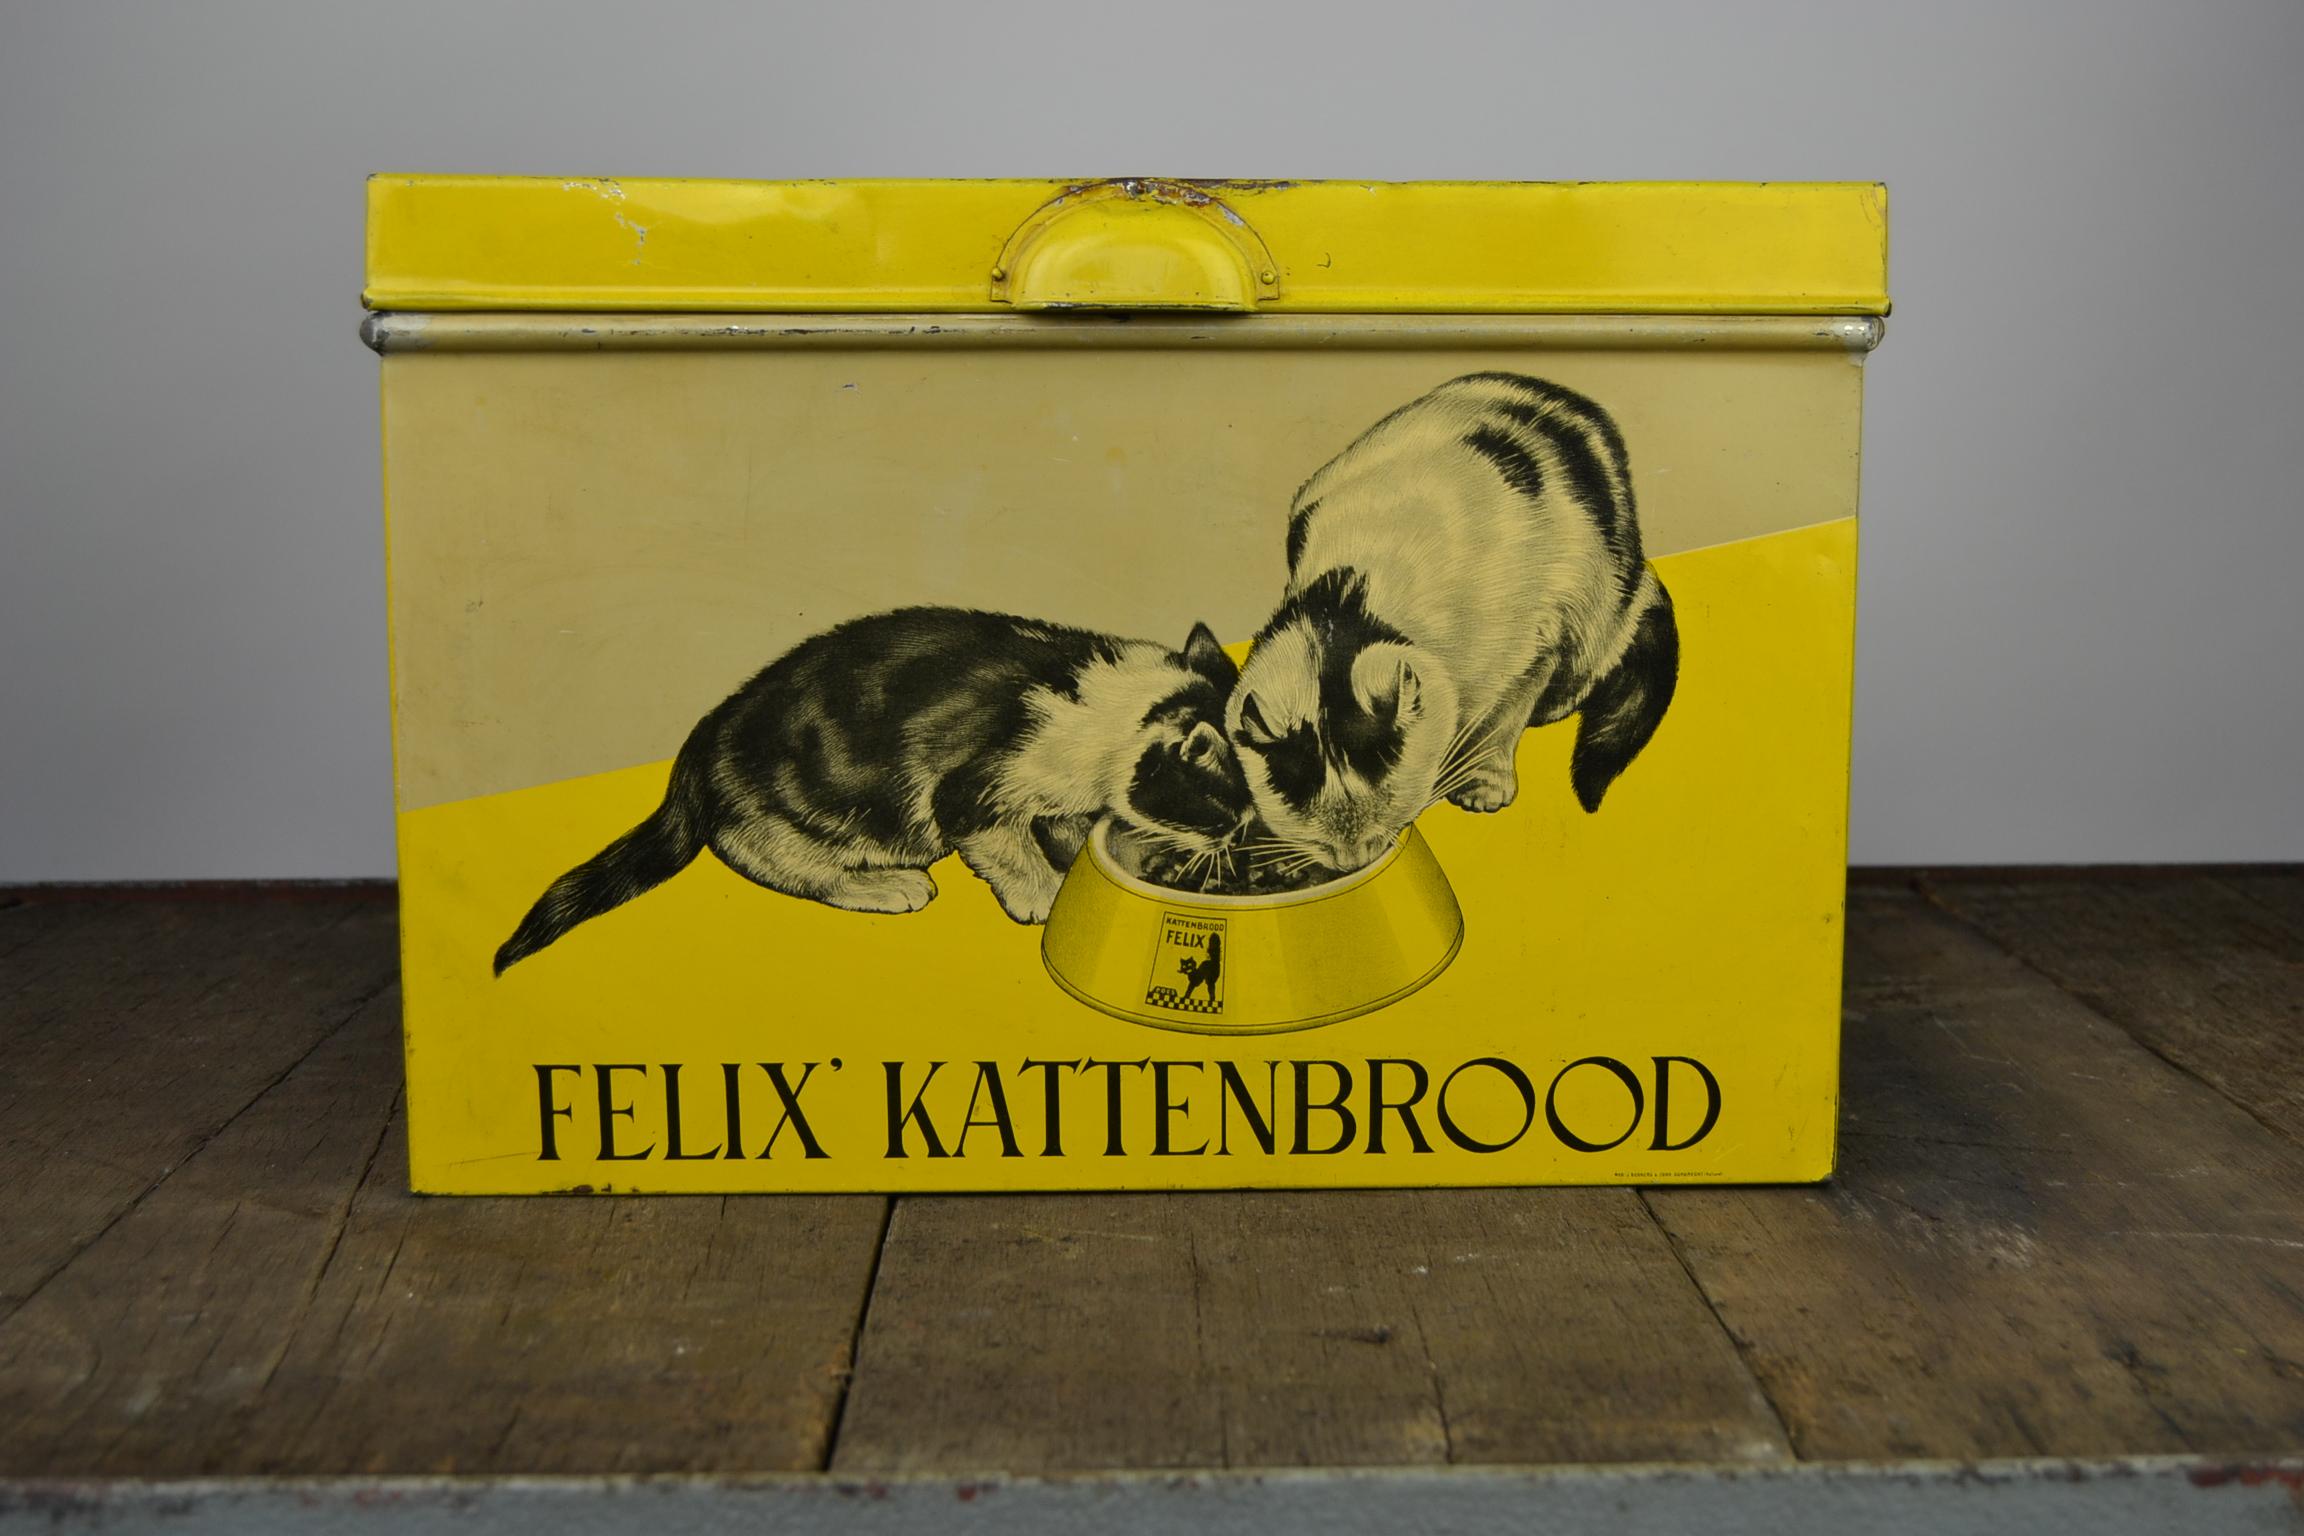 Awesome Tin Box for Cat Food dating  late 1930s - early 1940s. 
This Yellow Tin with Cats was made for the brand : 
Felix Kattenbrood, Pain de Chat Felix, Cat Bread Felix 
by the Dutch Company Wed J. Bekkers & Zoon Dordrecht Holland.
It's a great